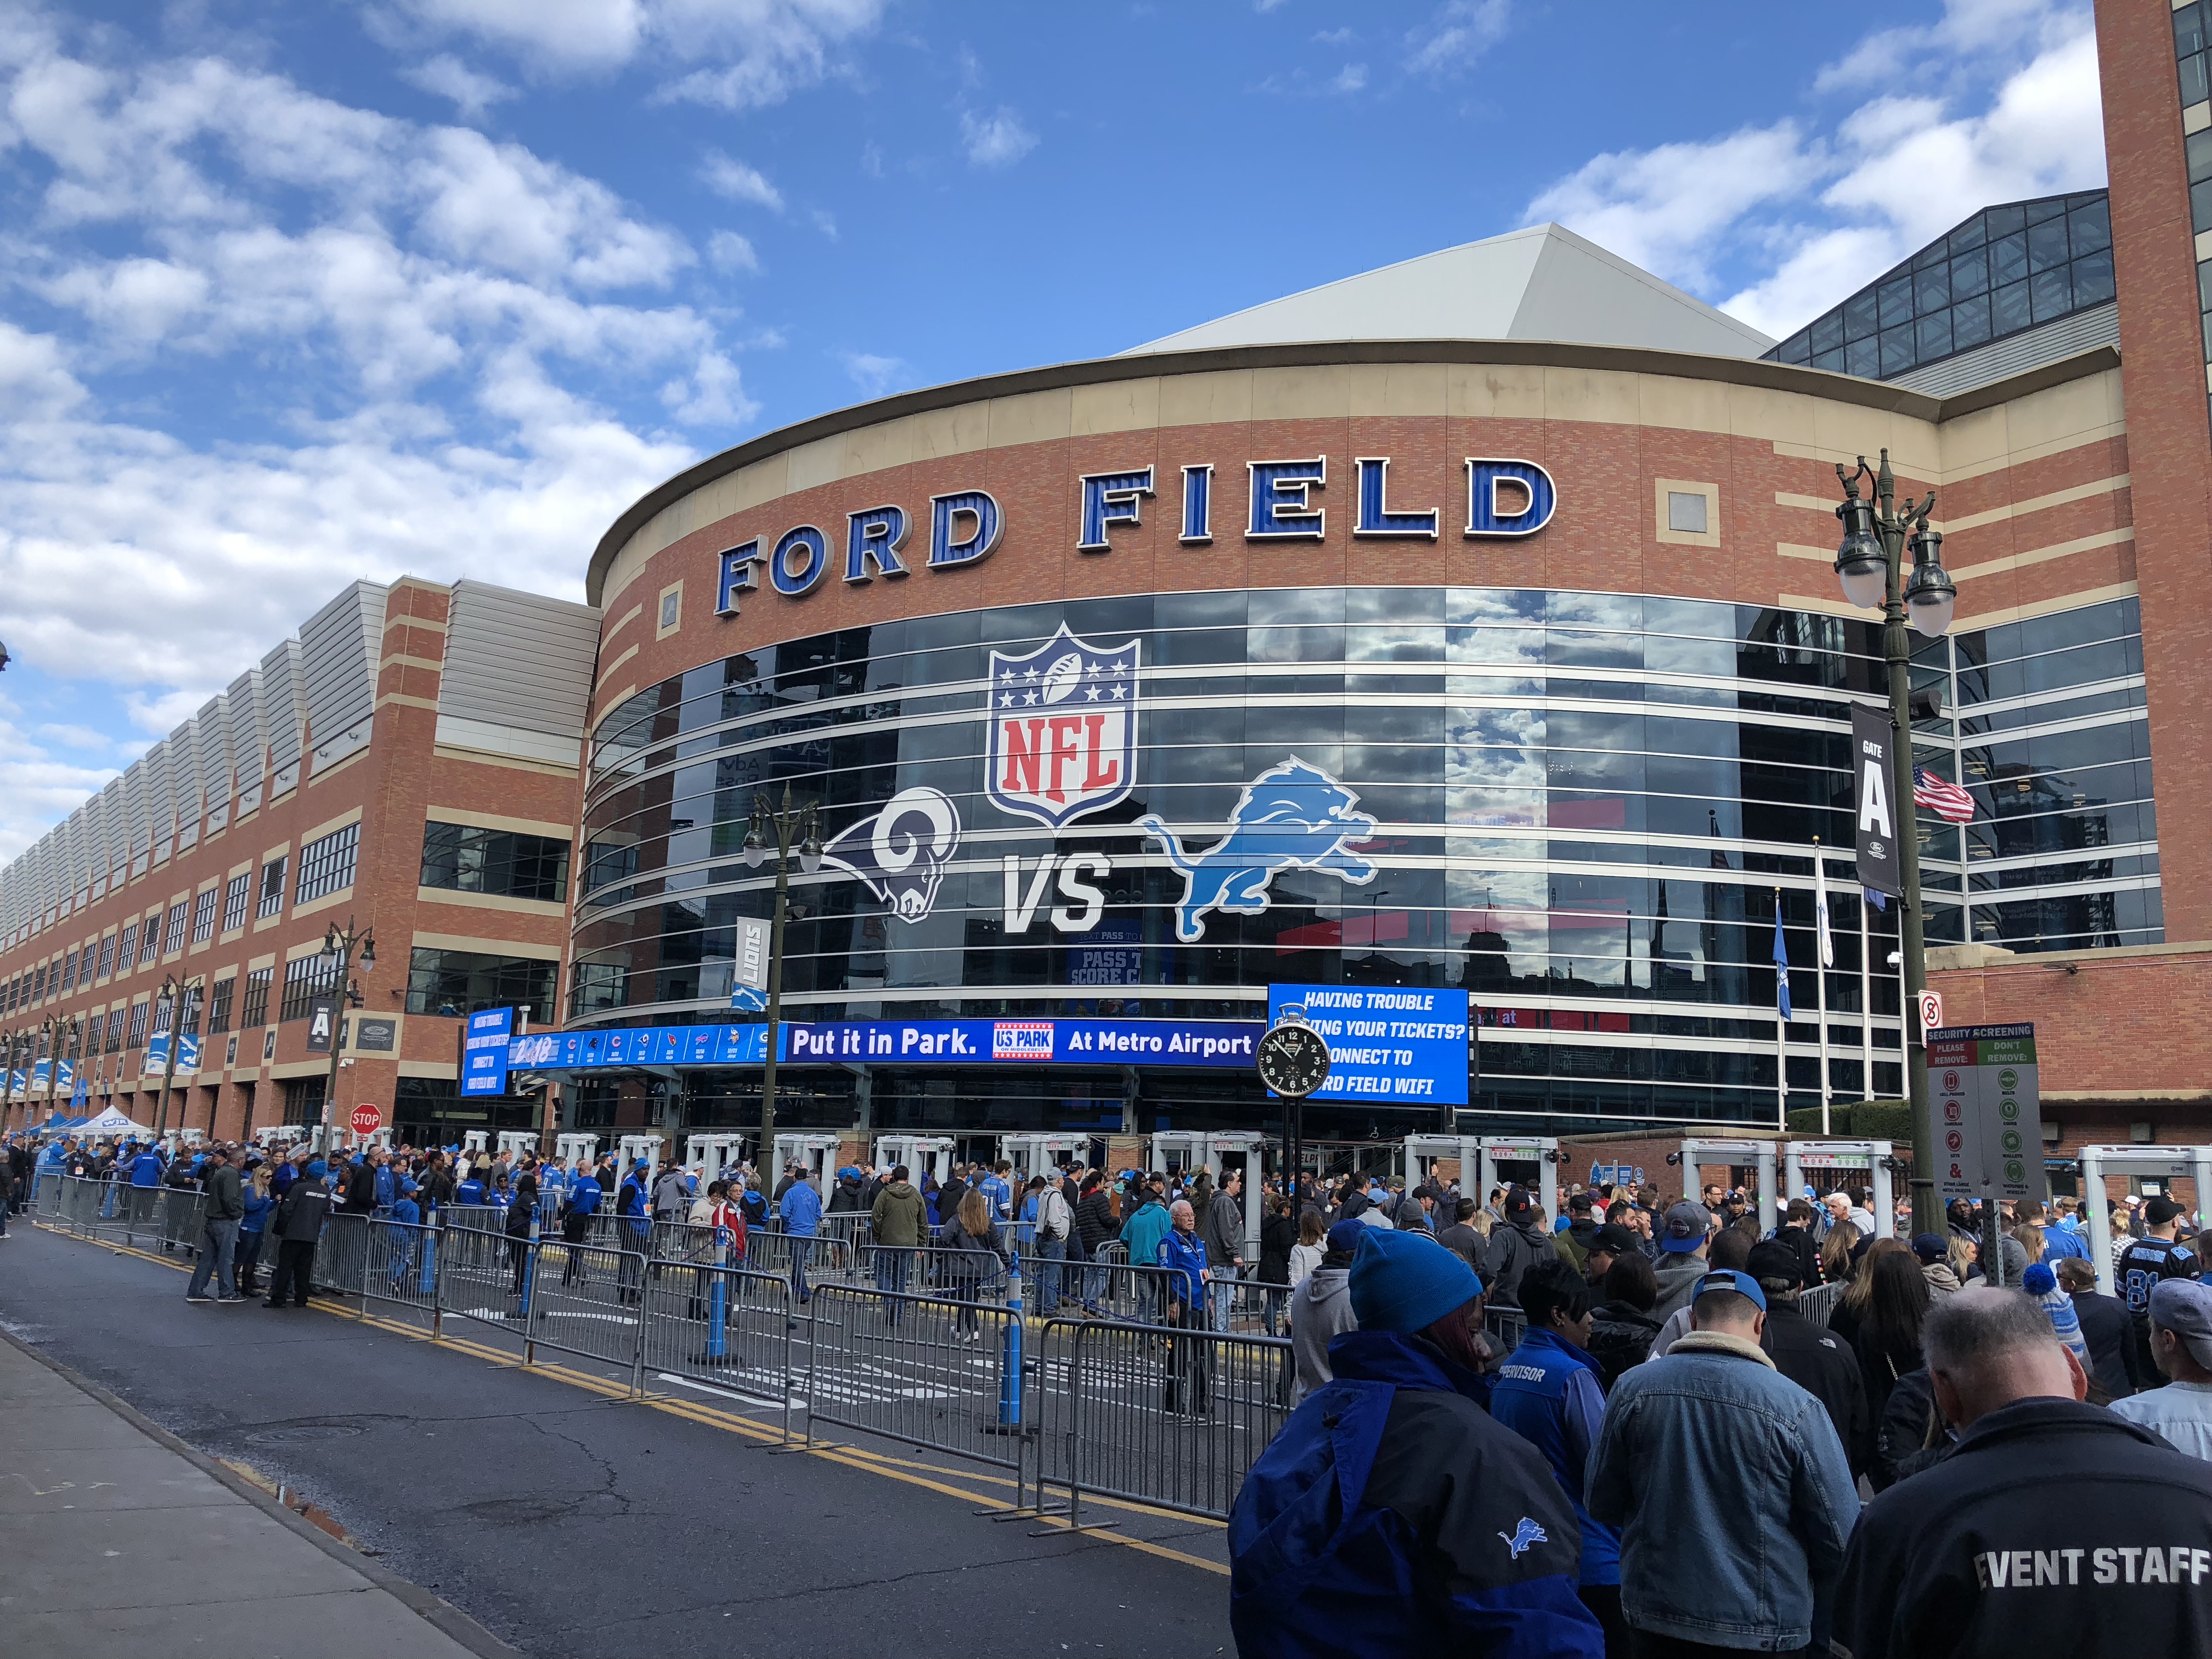 Lions to renovate Ford Field team store, switch concessionaire